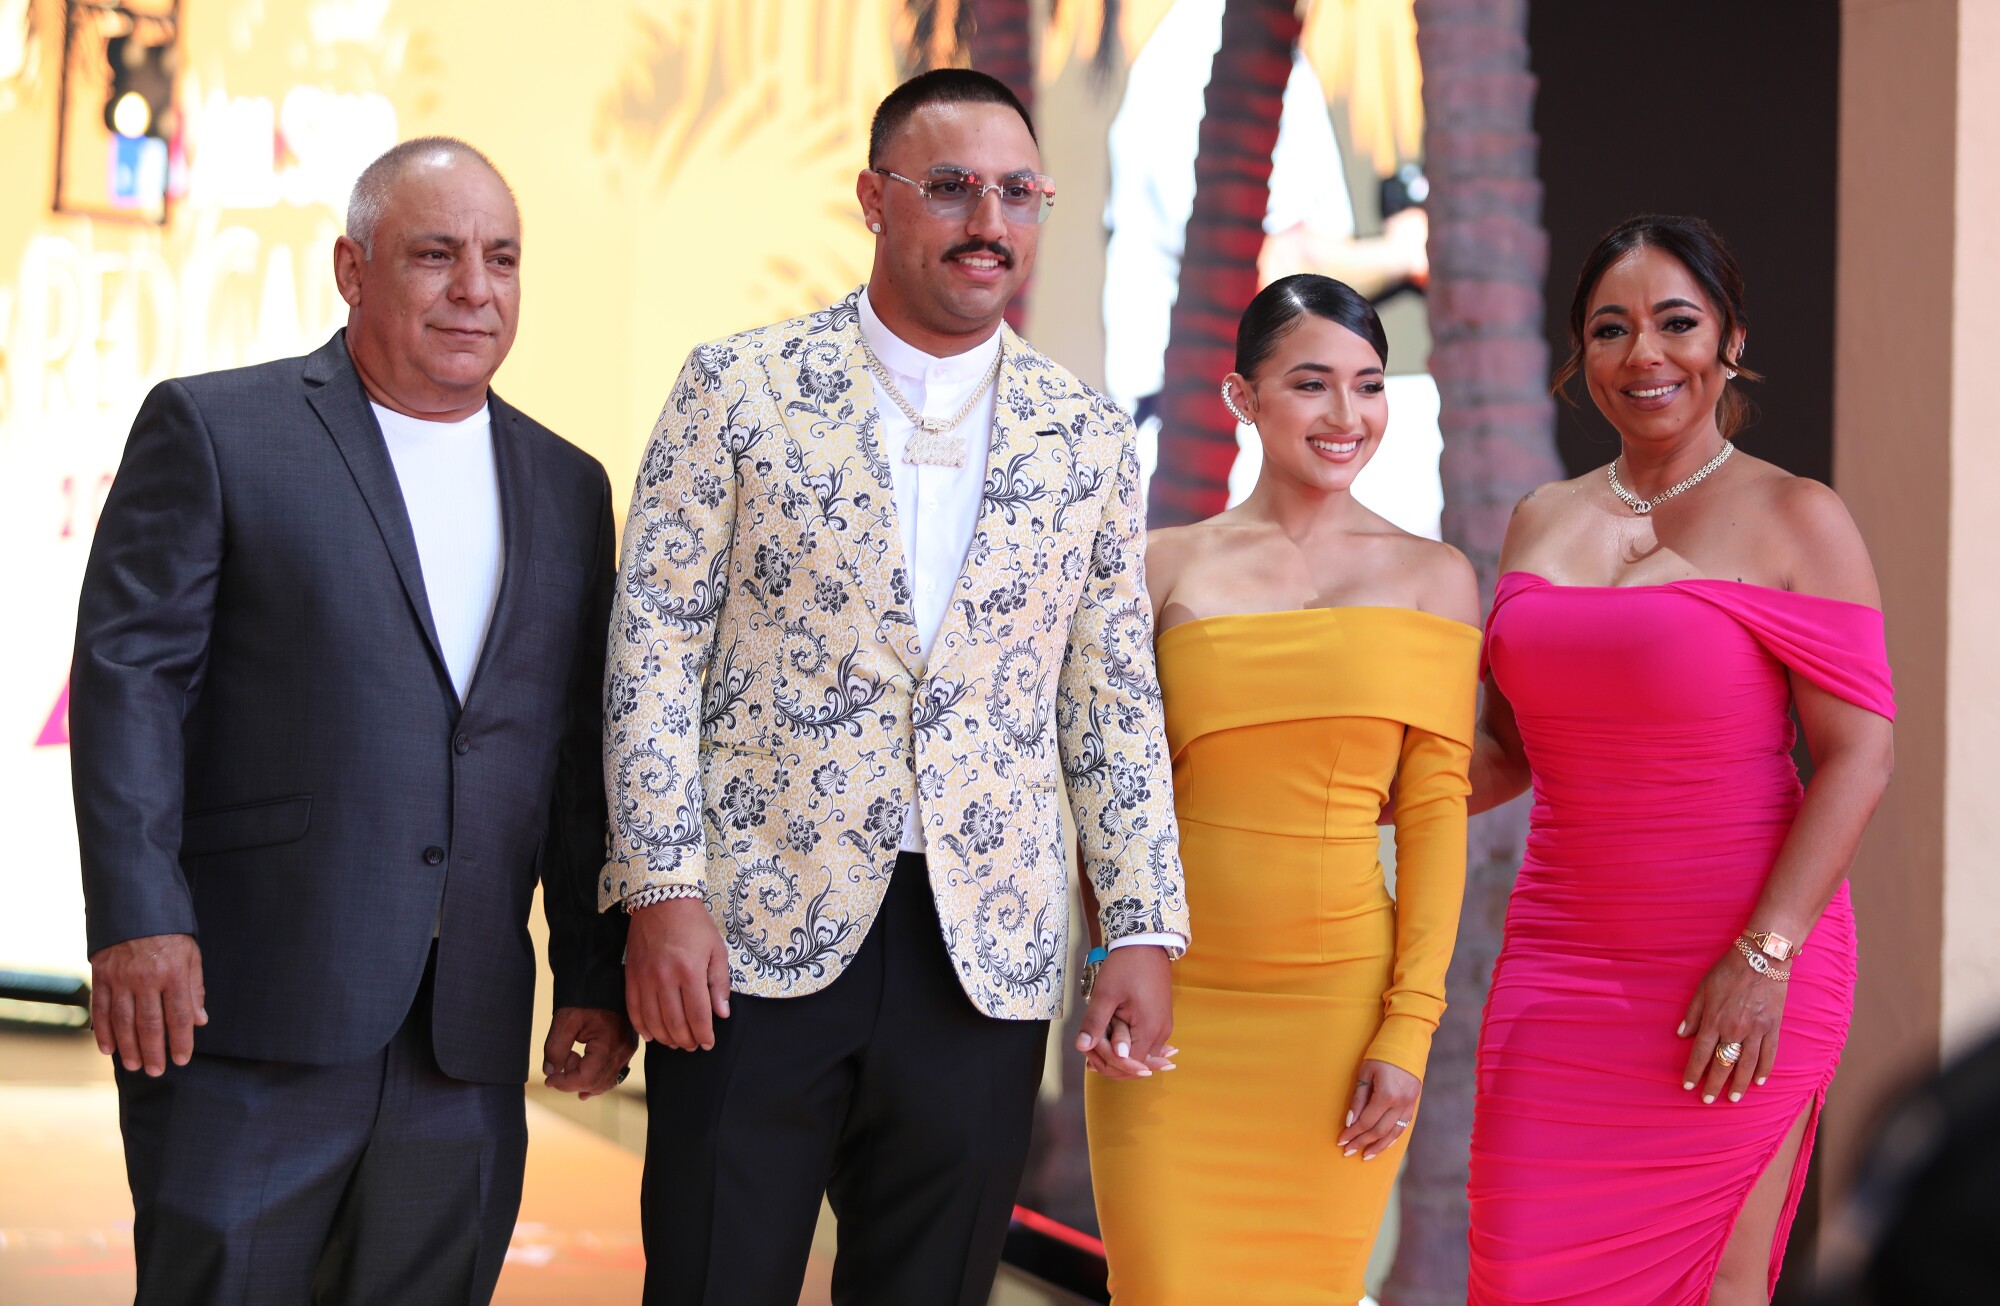 New York Yankees pitcher Nestor Cortez Jr.  arrives with his family on the red carpet of the 2022 MLB All-Star Game.